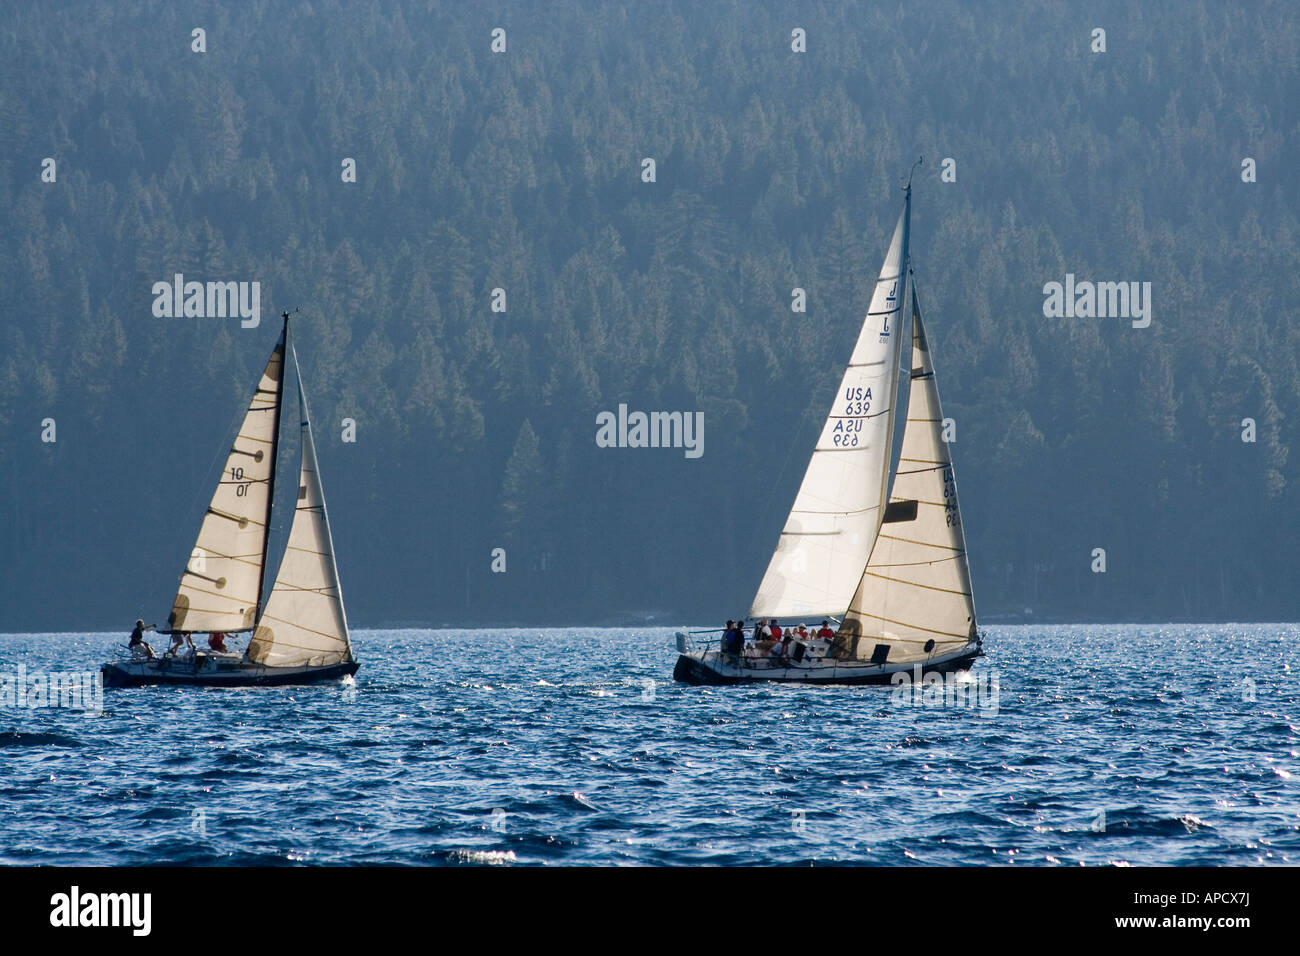 Sailboats on Lake Tahoe backlit during a race Stock Photo